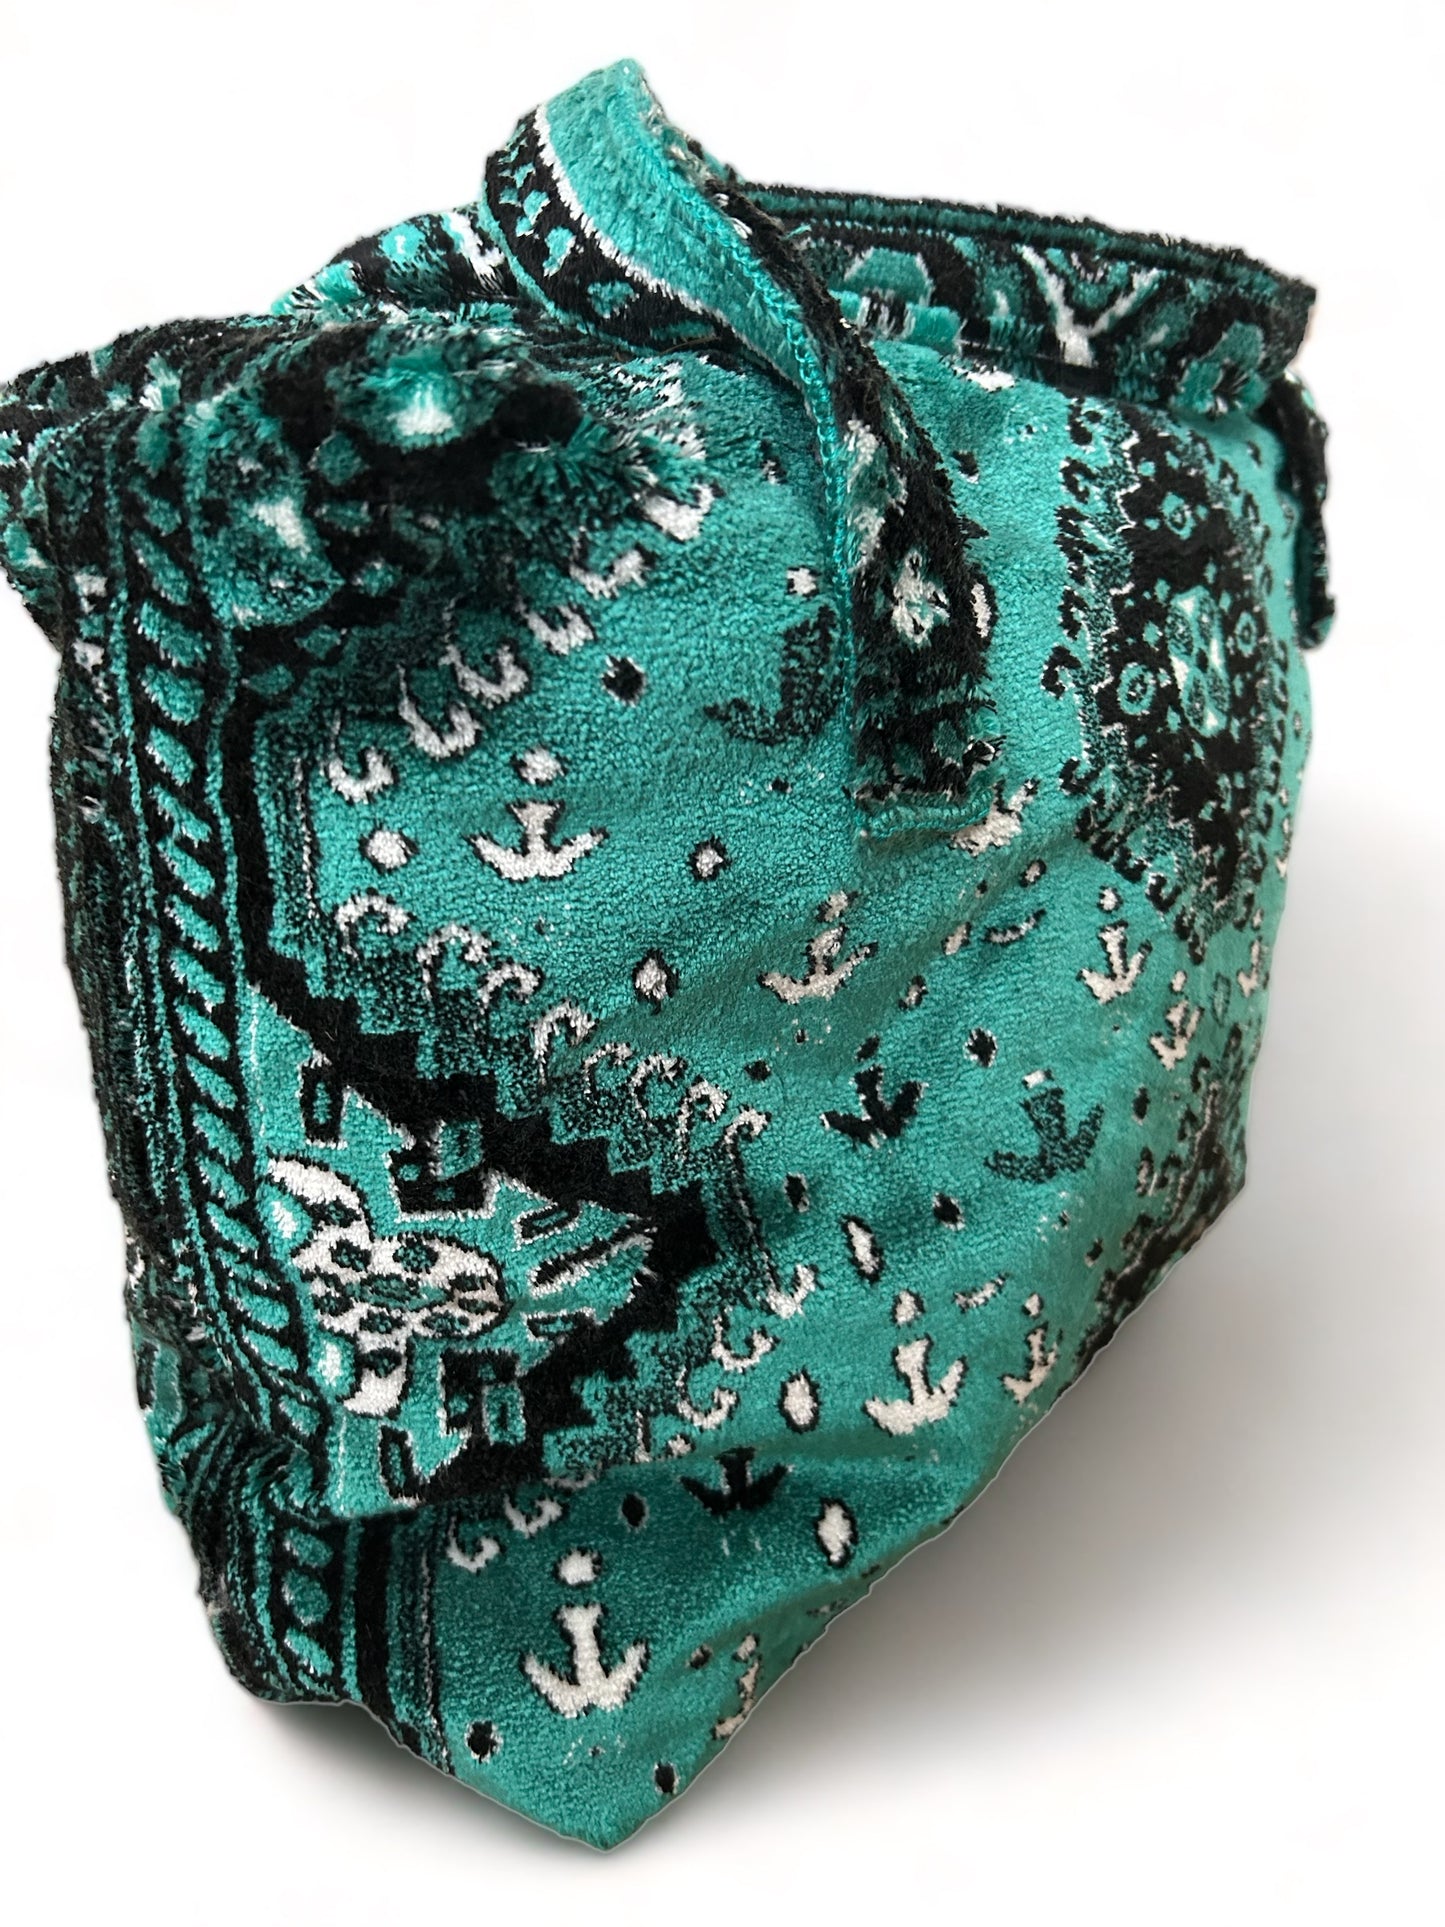 Bag made of carpet fabric with zipper, turquoise